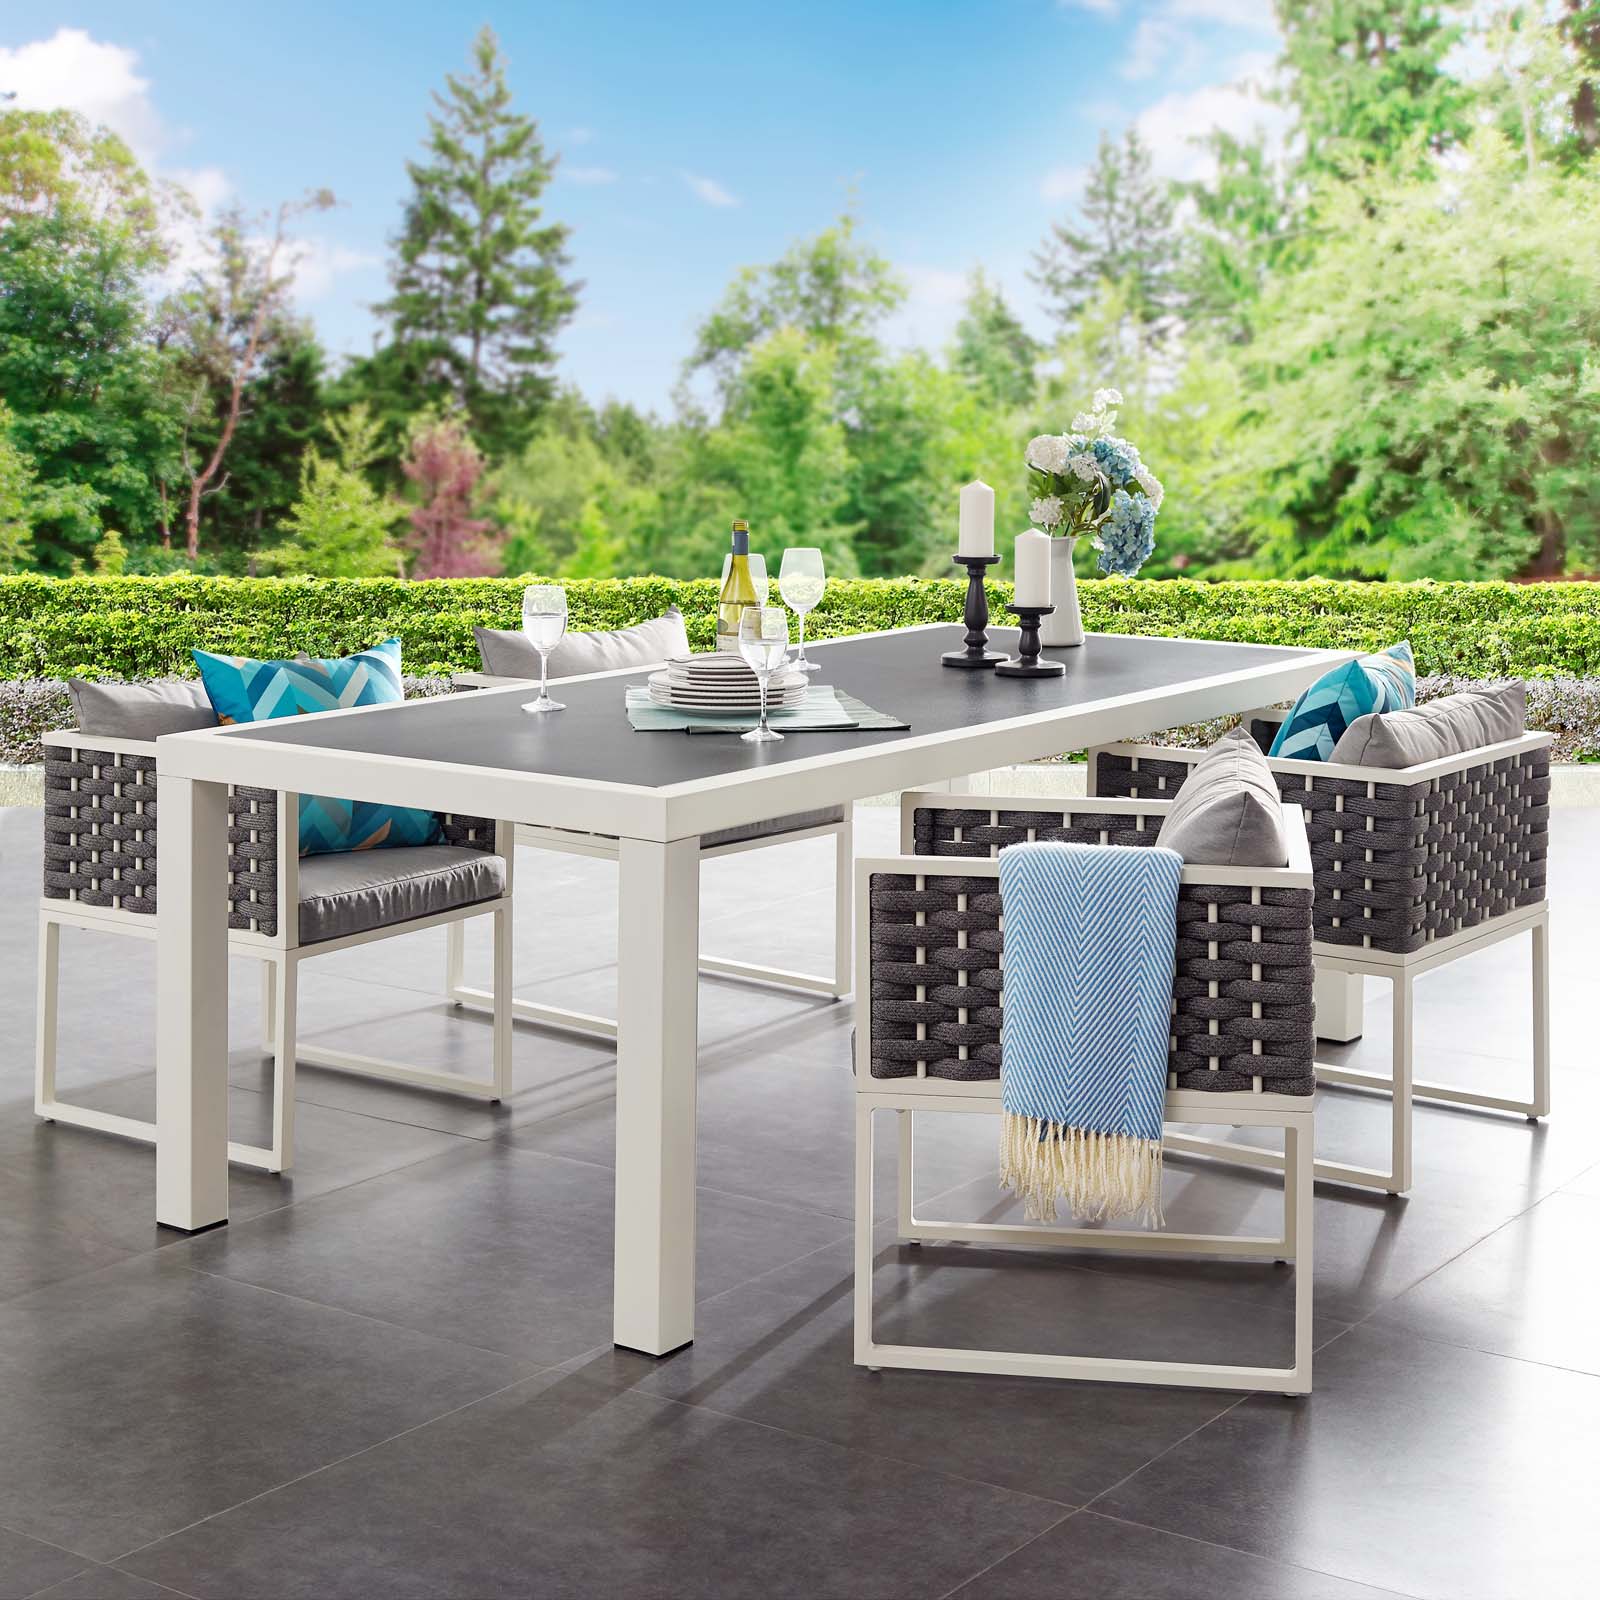 Modway Stance 90.5" Outdoor Patio Aluminum Dining Table in White Gray - image 1 of 6